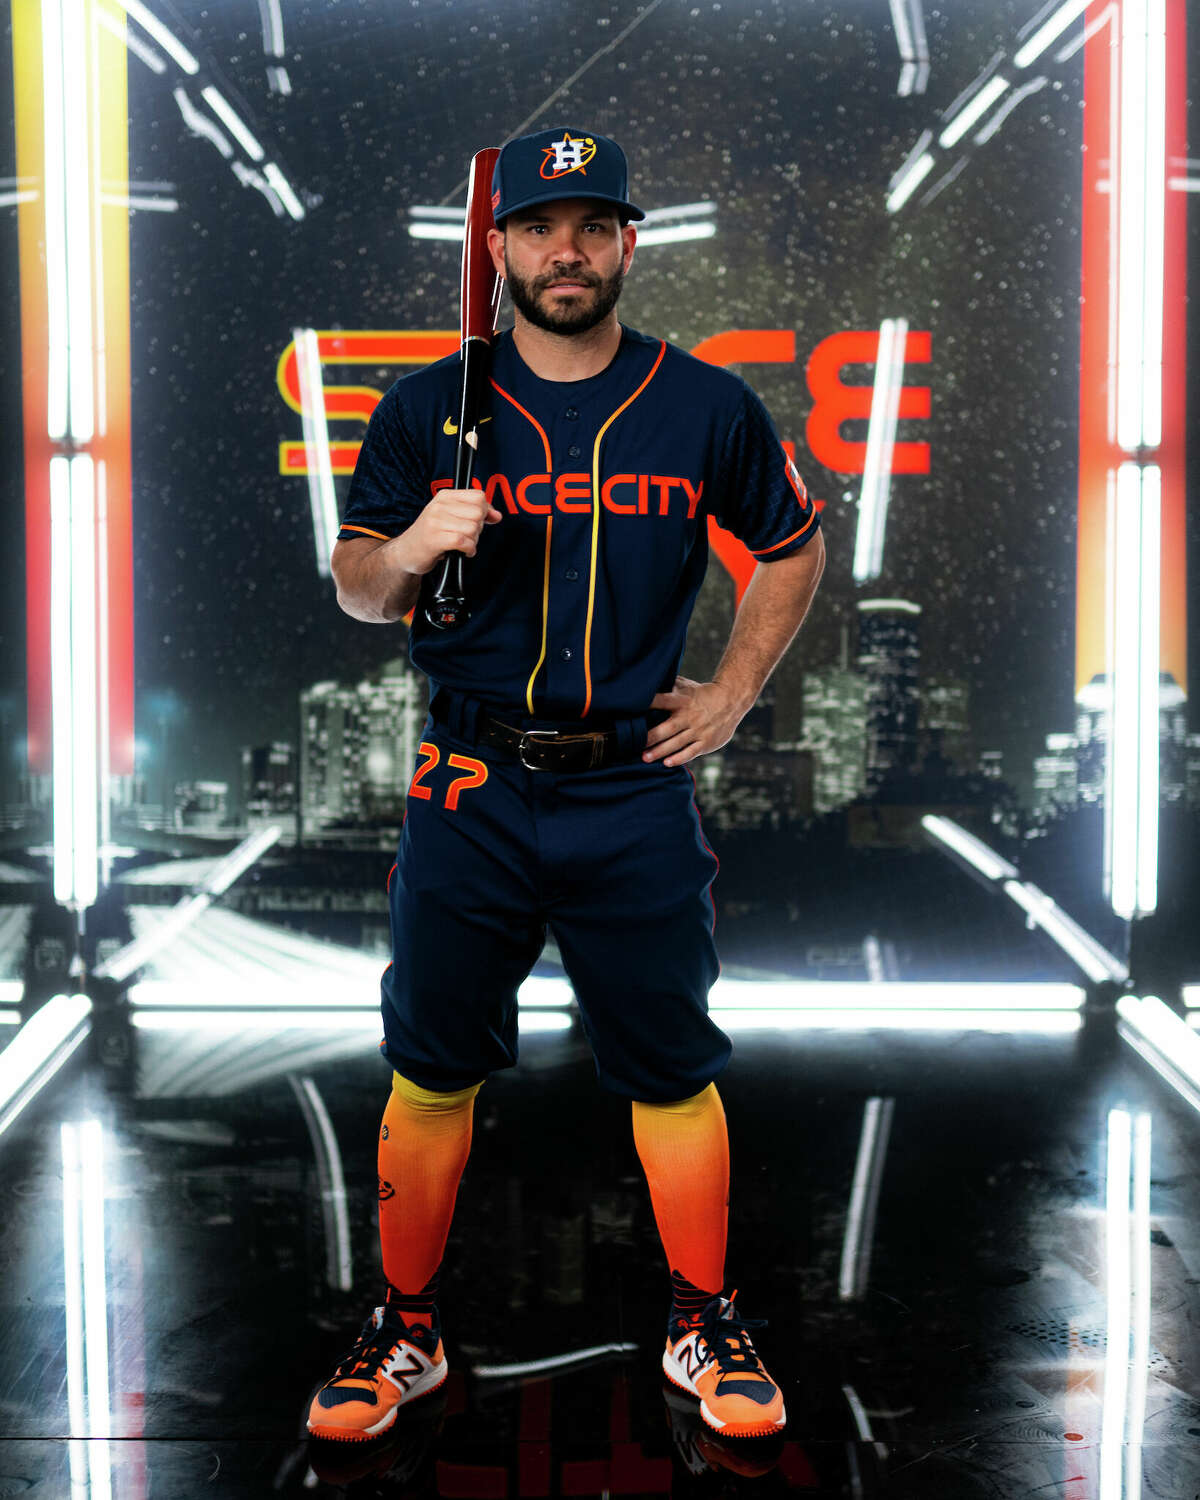 Houston Astros Space City jersey City Connect uniforms first look